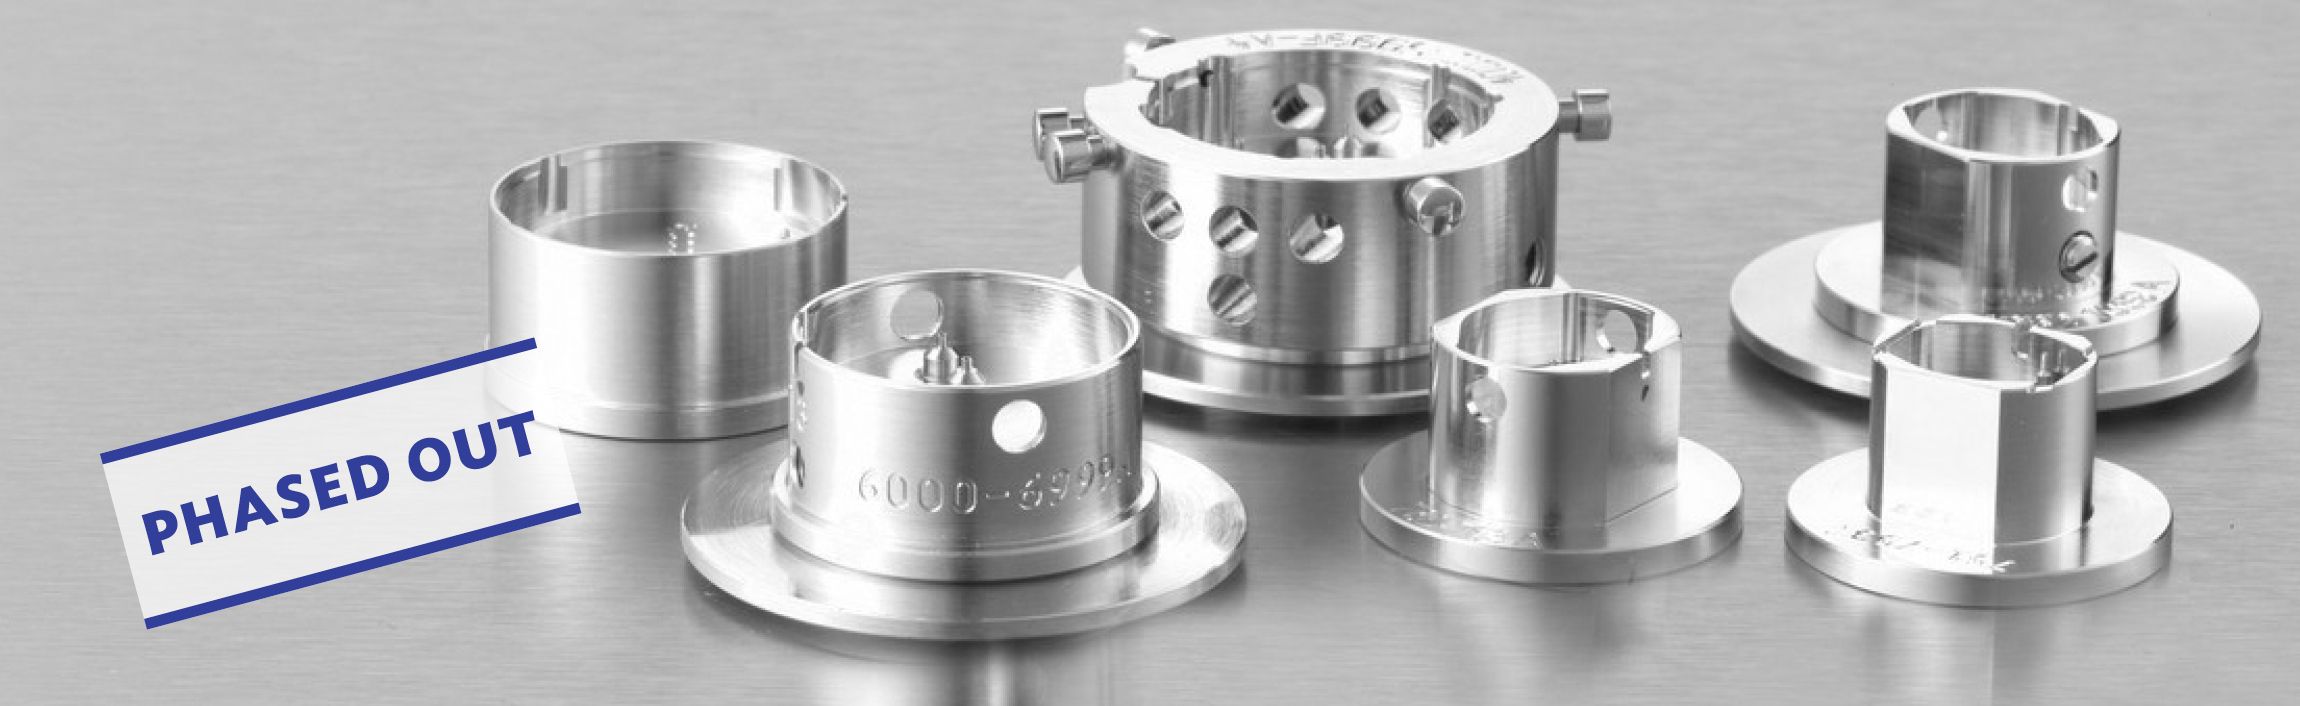 Casing information and movement holders of all Ronda movements, which areno longer manufactured.